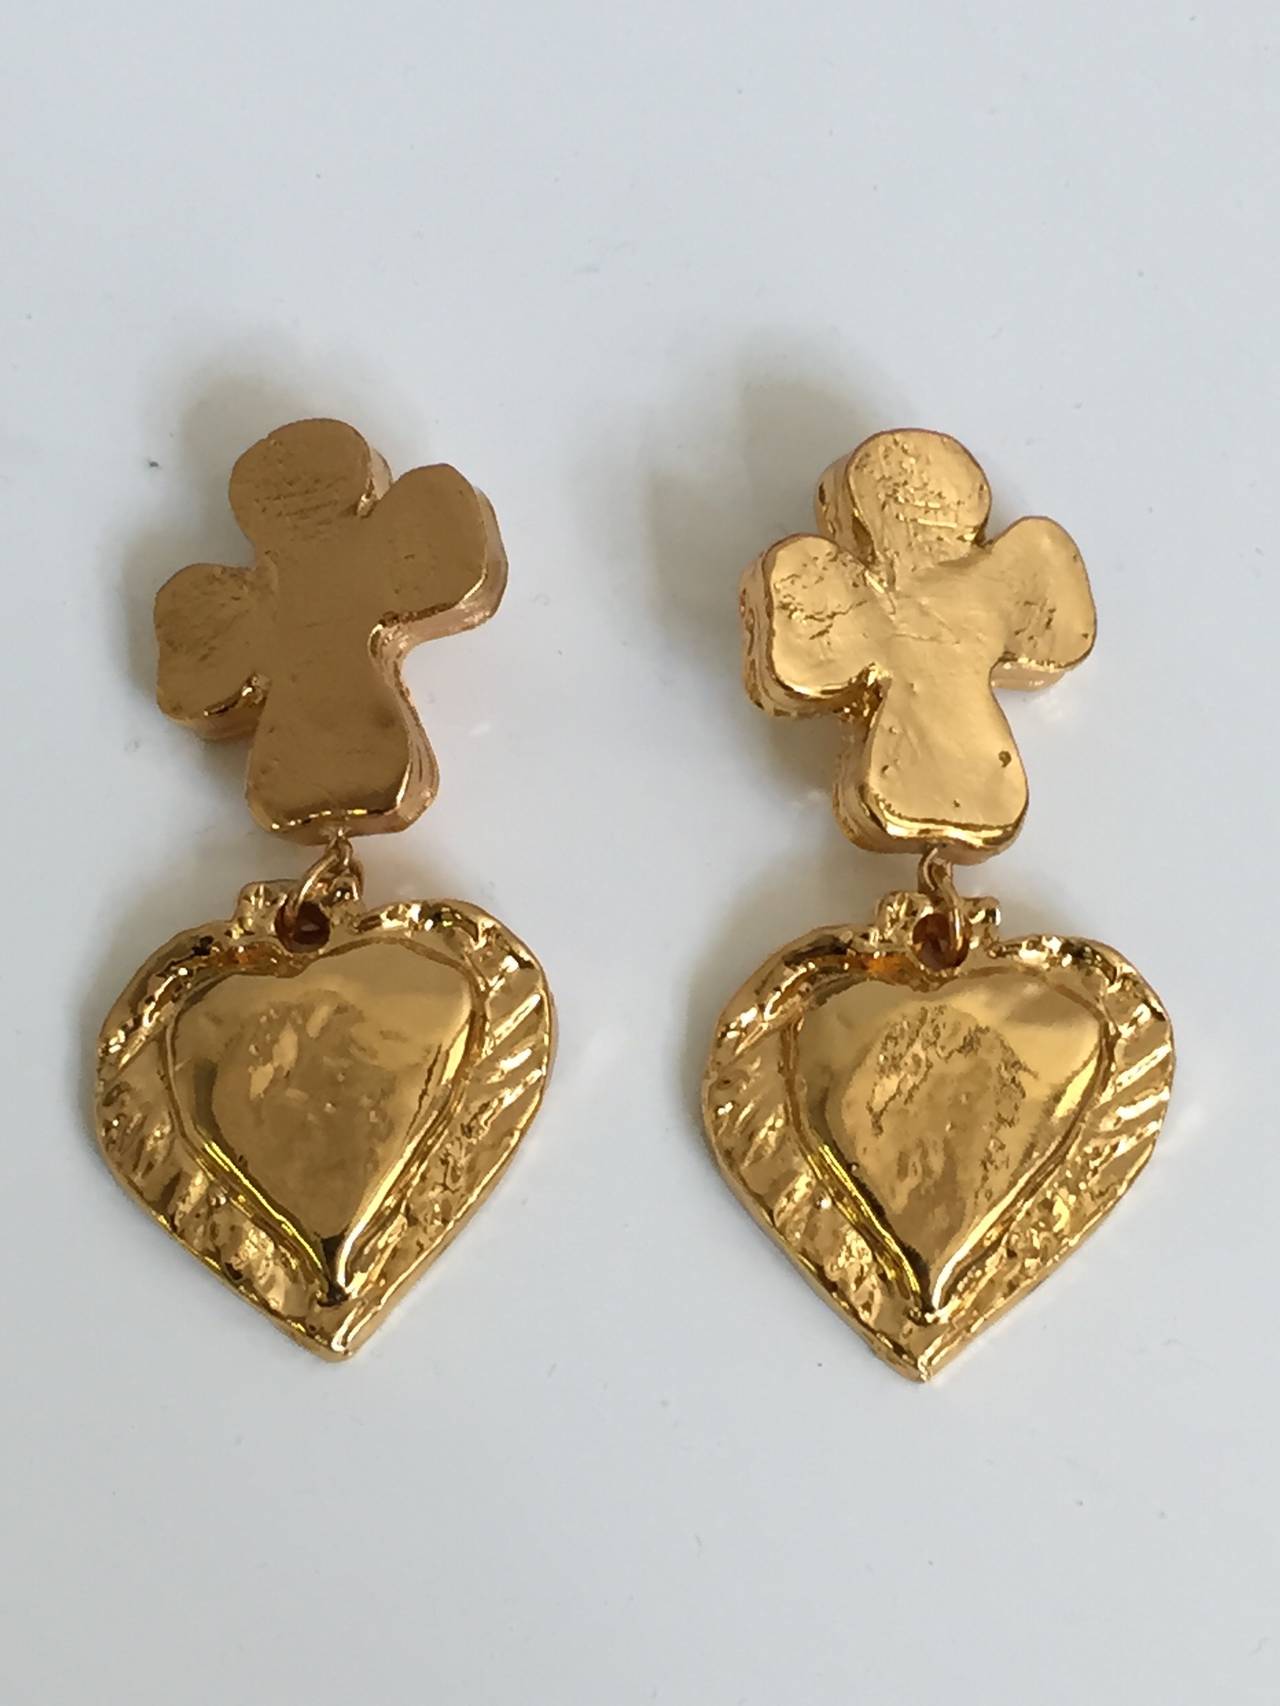 Christian Lacroix 1980s light weight gold cross & heart dangle clip on earrings.
Made in France. 
Measurement is 4